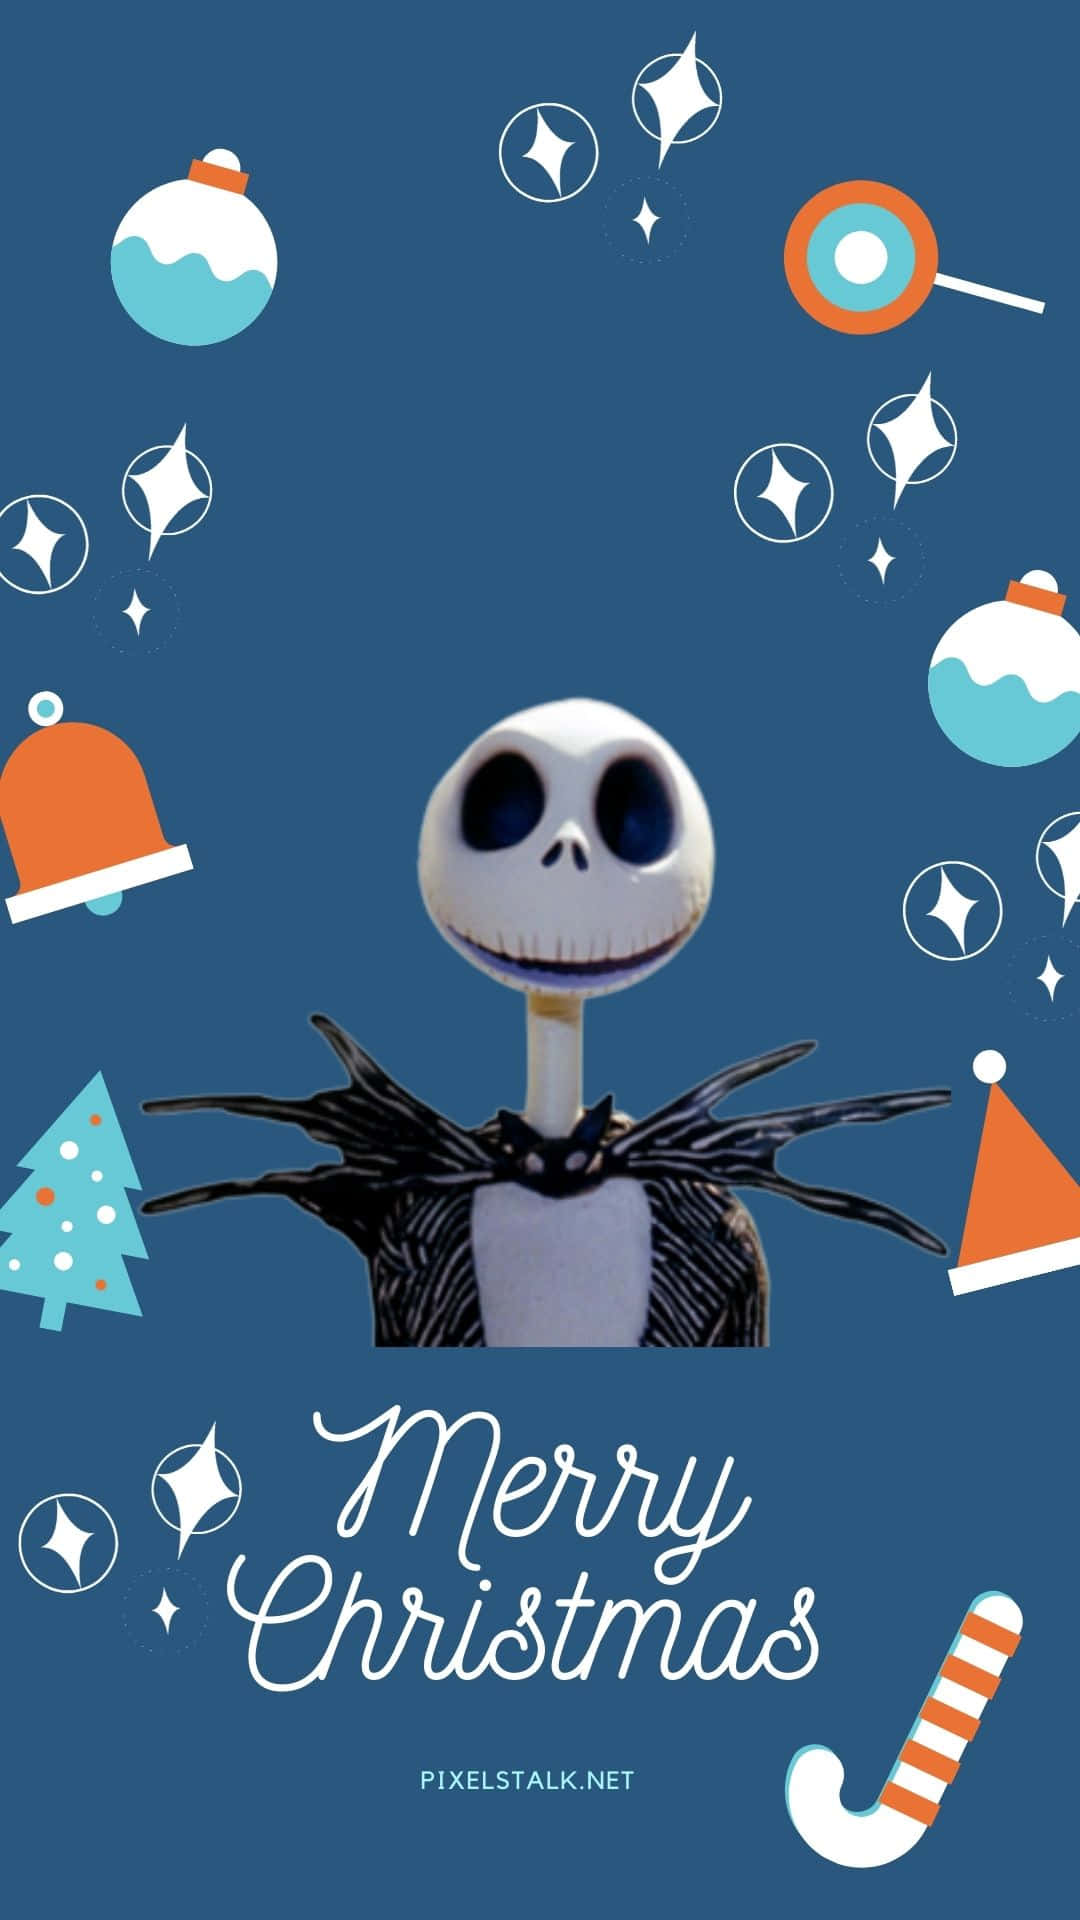 Get Spookey in Style with Nightmare Before Christmas Phone Wallpaper